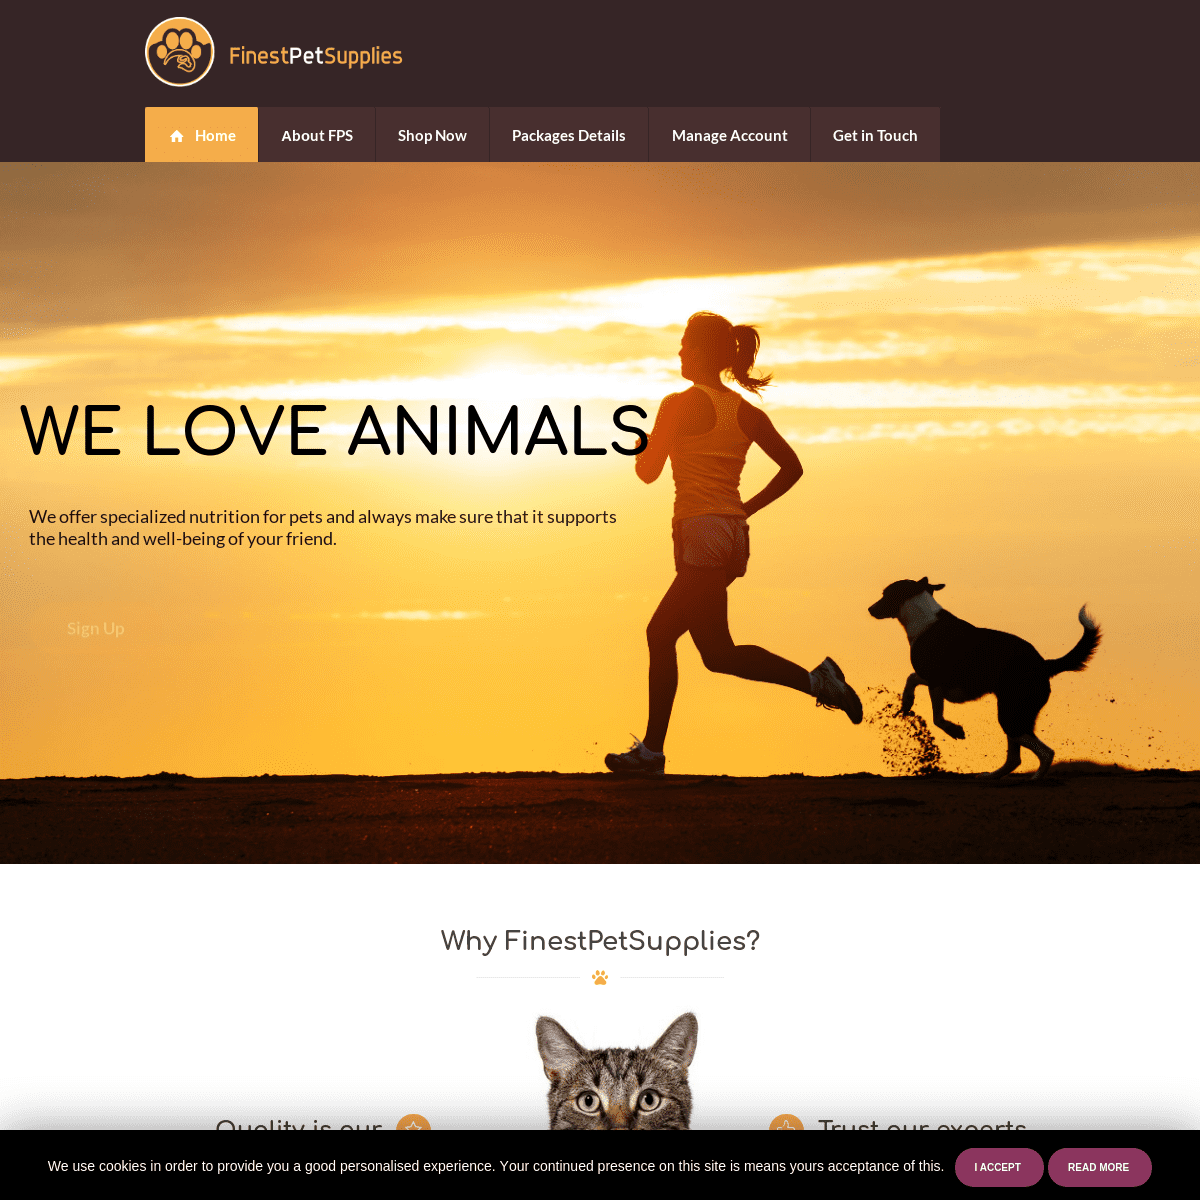 FinestPetSupplies – The one stop shop for all your pet's desires